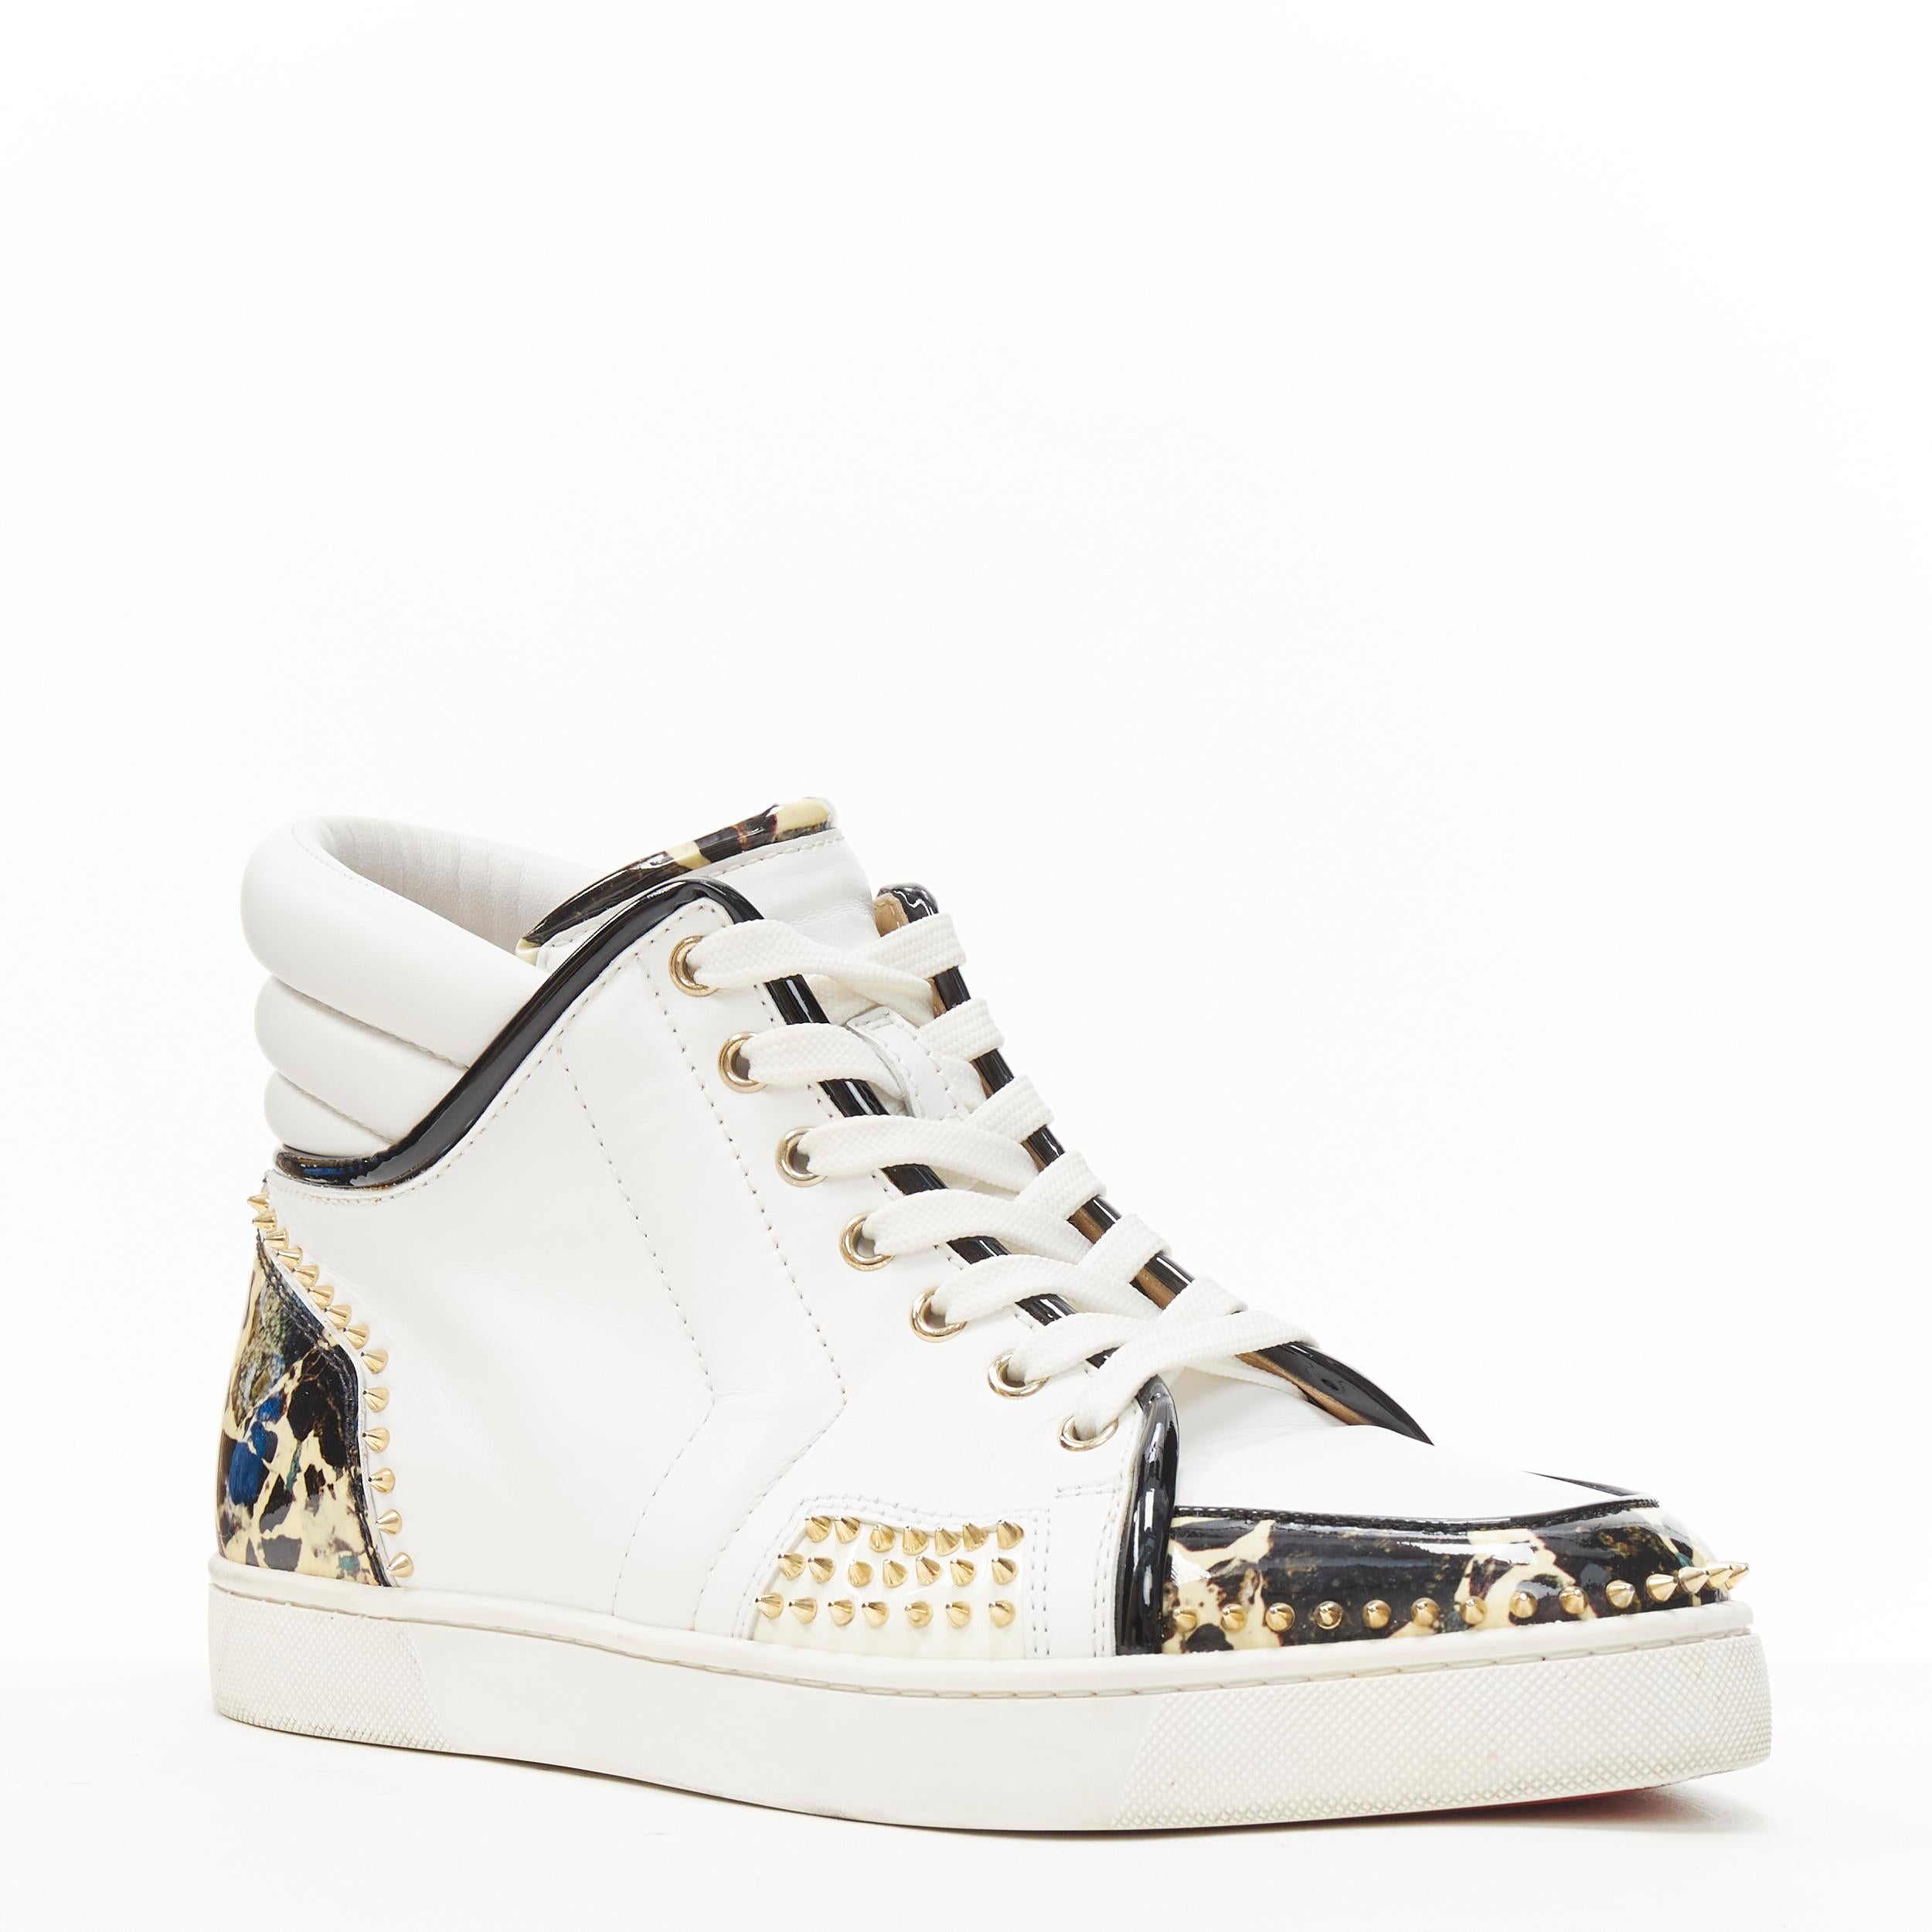 CHRISTIAN LOUBOUTIN white leather stone patent spike stud high top sneakers EU42 
Reference: TGAS/B01062 
Brand: Christian Louboutin 
Designer: Christian Louboutin 
Model: White patent spike stud high top 
Material: Leather 
Color: White 
Pattern: